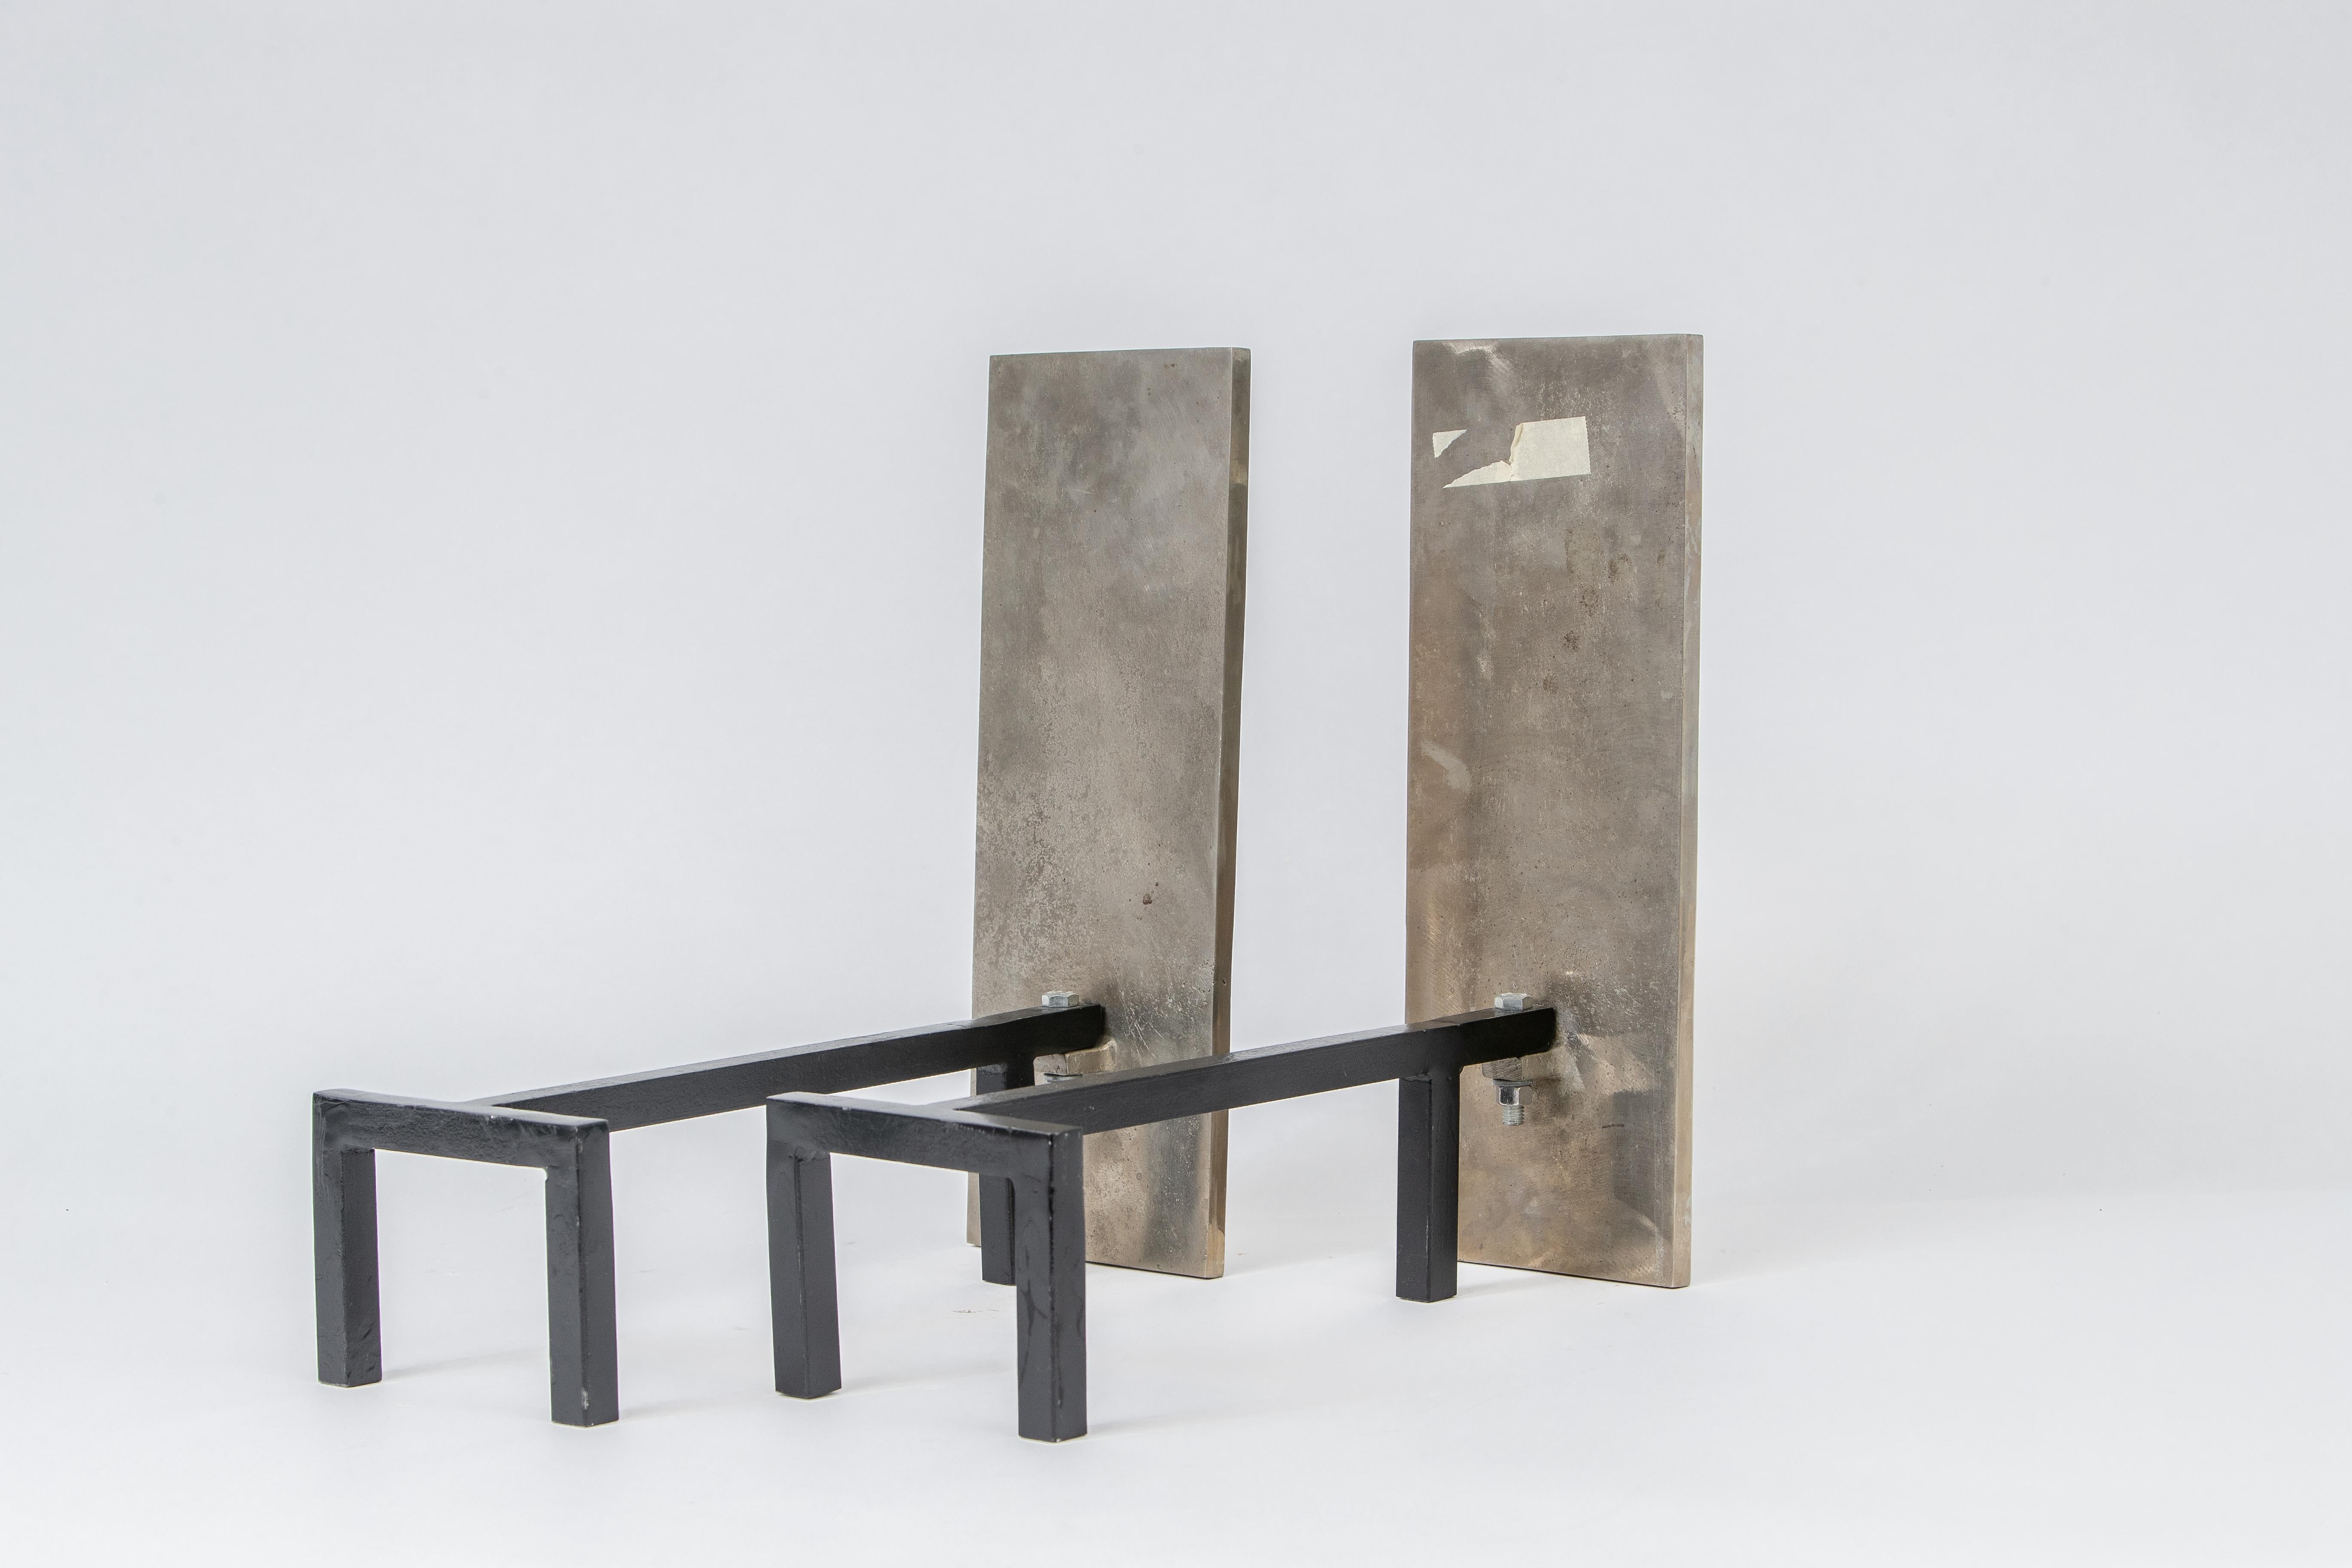 A large pair of modernist andirons in nickel-plated bronze by Jacques Adnet. The front is a large slab of bronze finished in nickel with nice aging. A robust design.